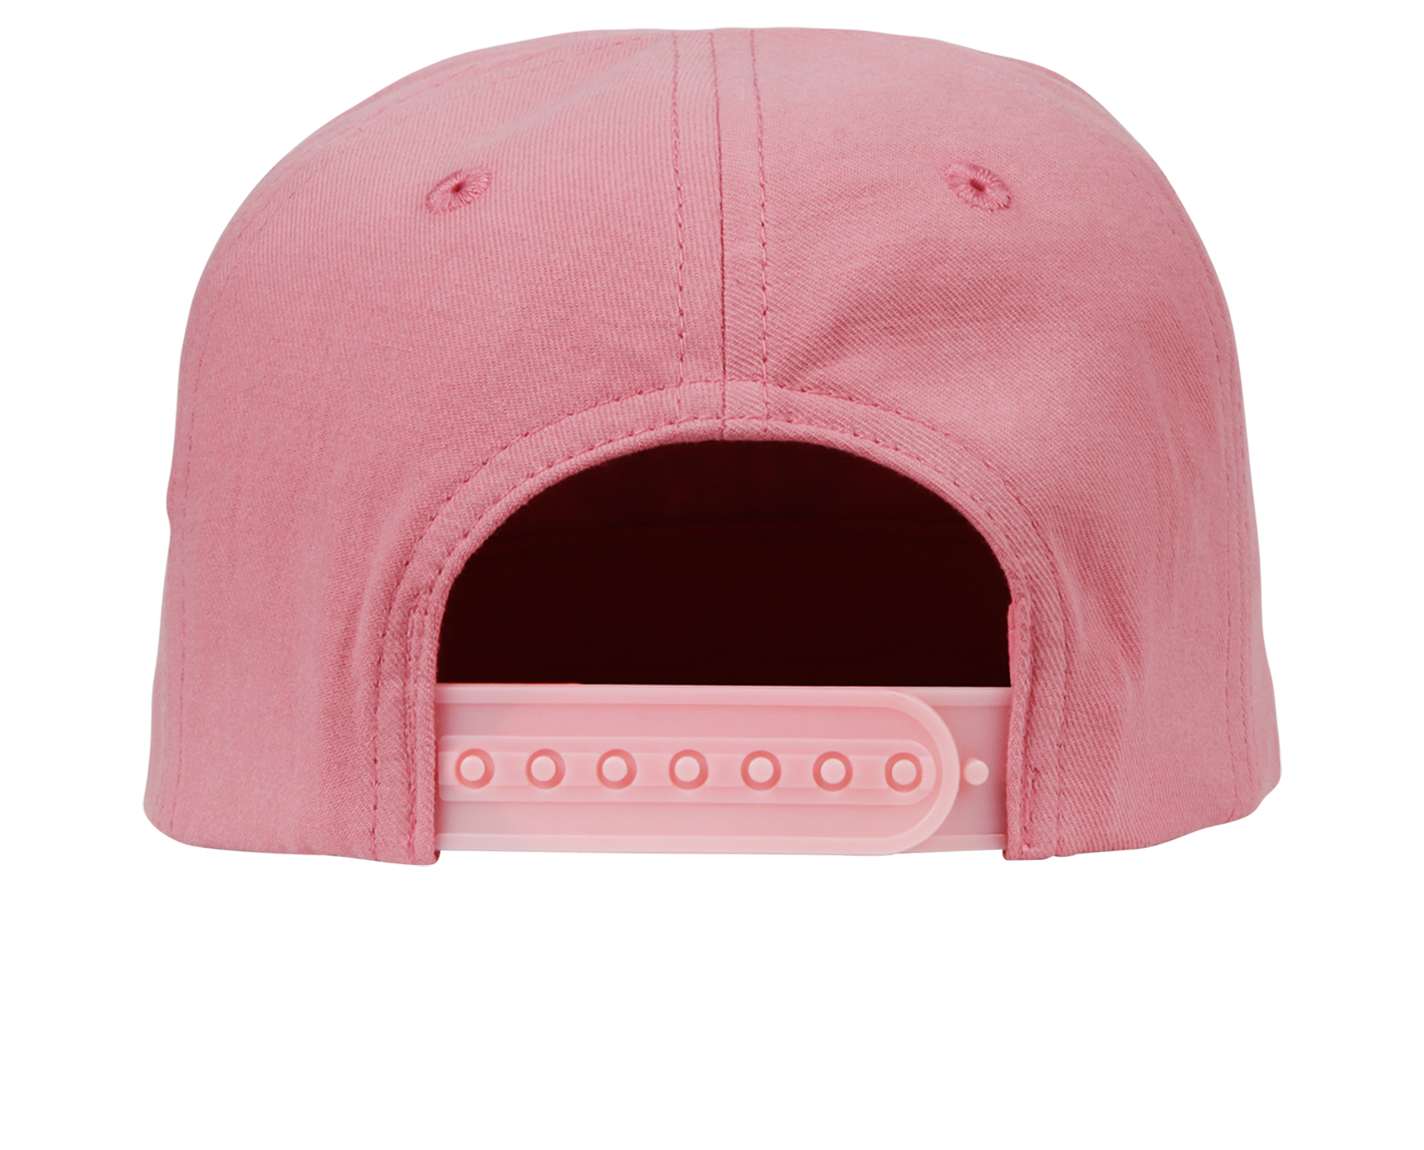 Mondos Hat: Youth (3 years - 6 years) / Mauve / Non-Structured